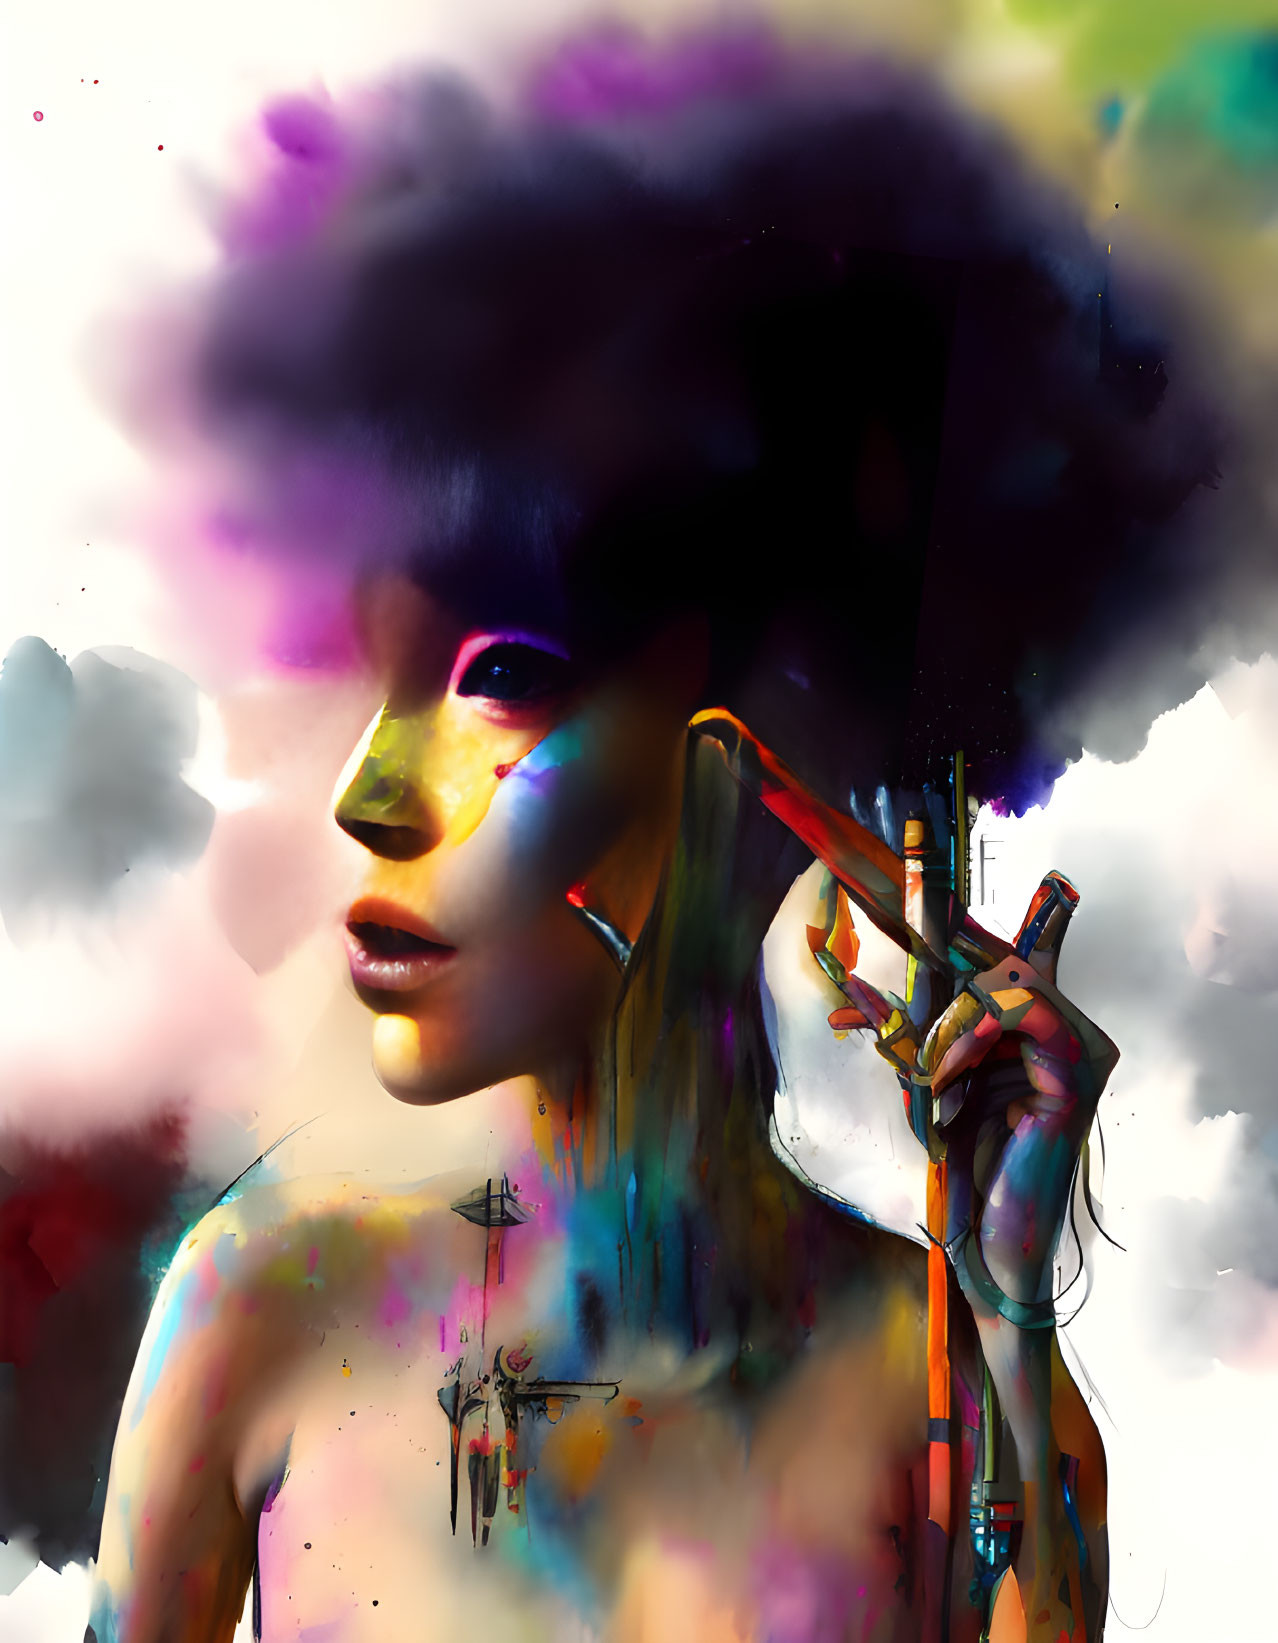 Colorful abstract portrait of a woman with cloud-like hair and umbrella